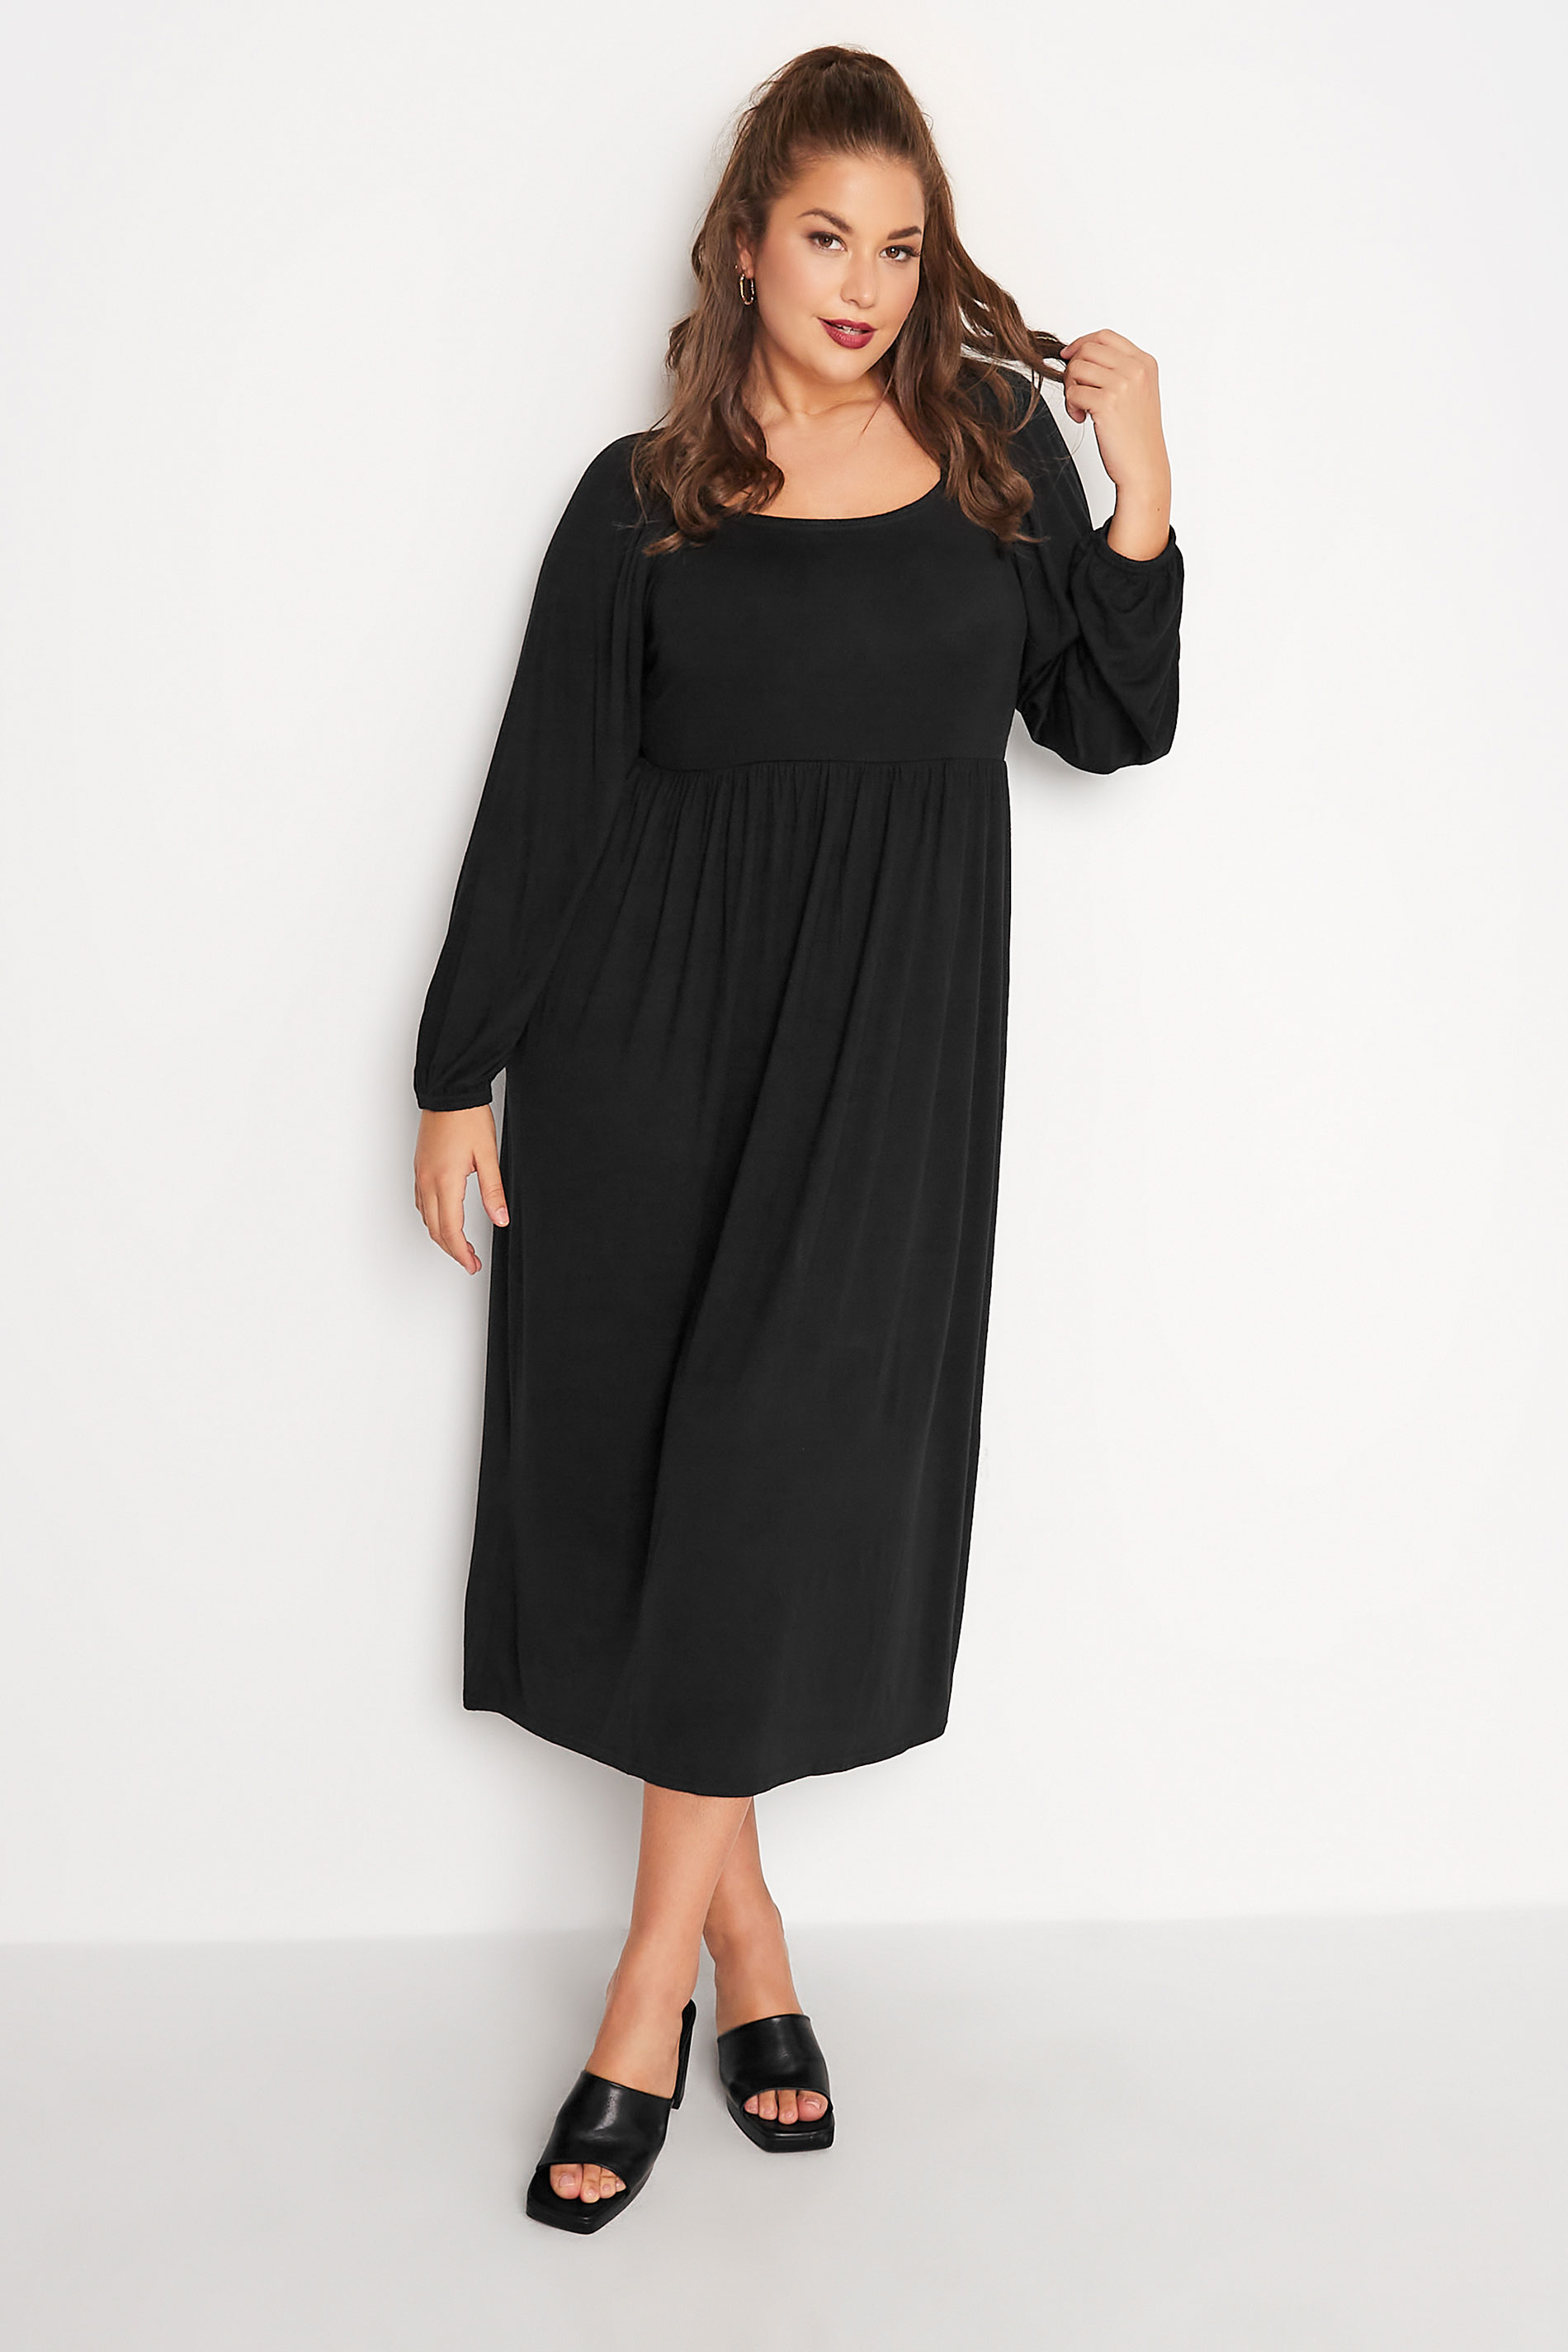 LIMITED COLLECTION Plus Size Black Smock Dress | Yours Clothing  1